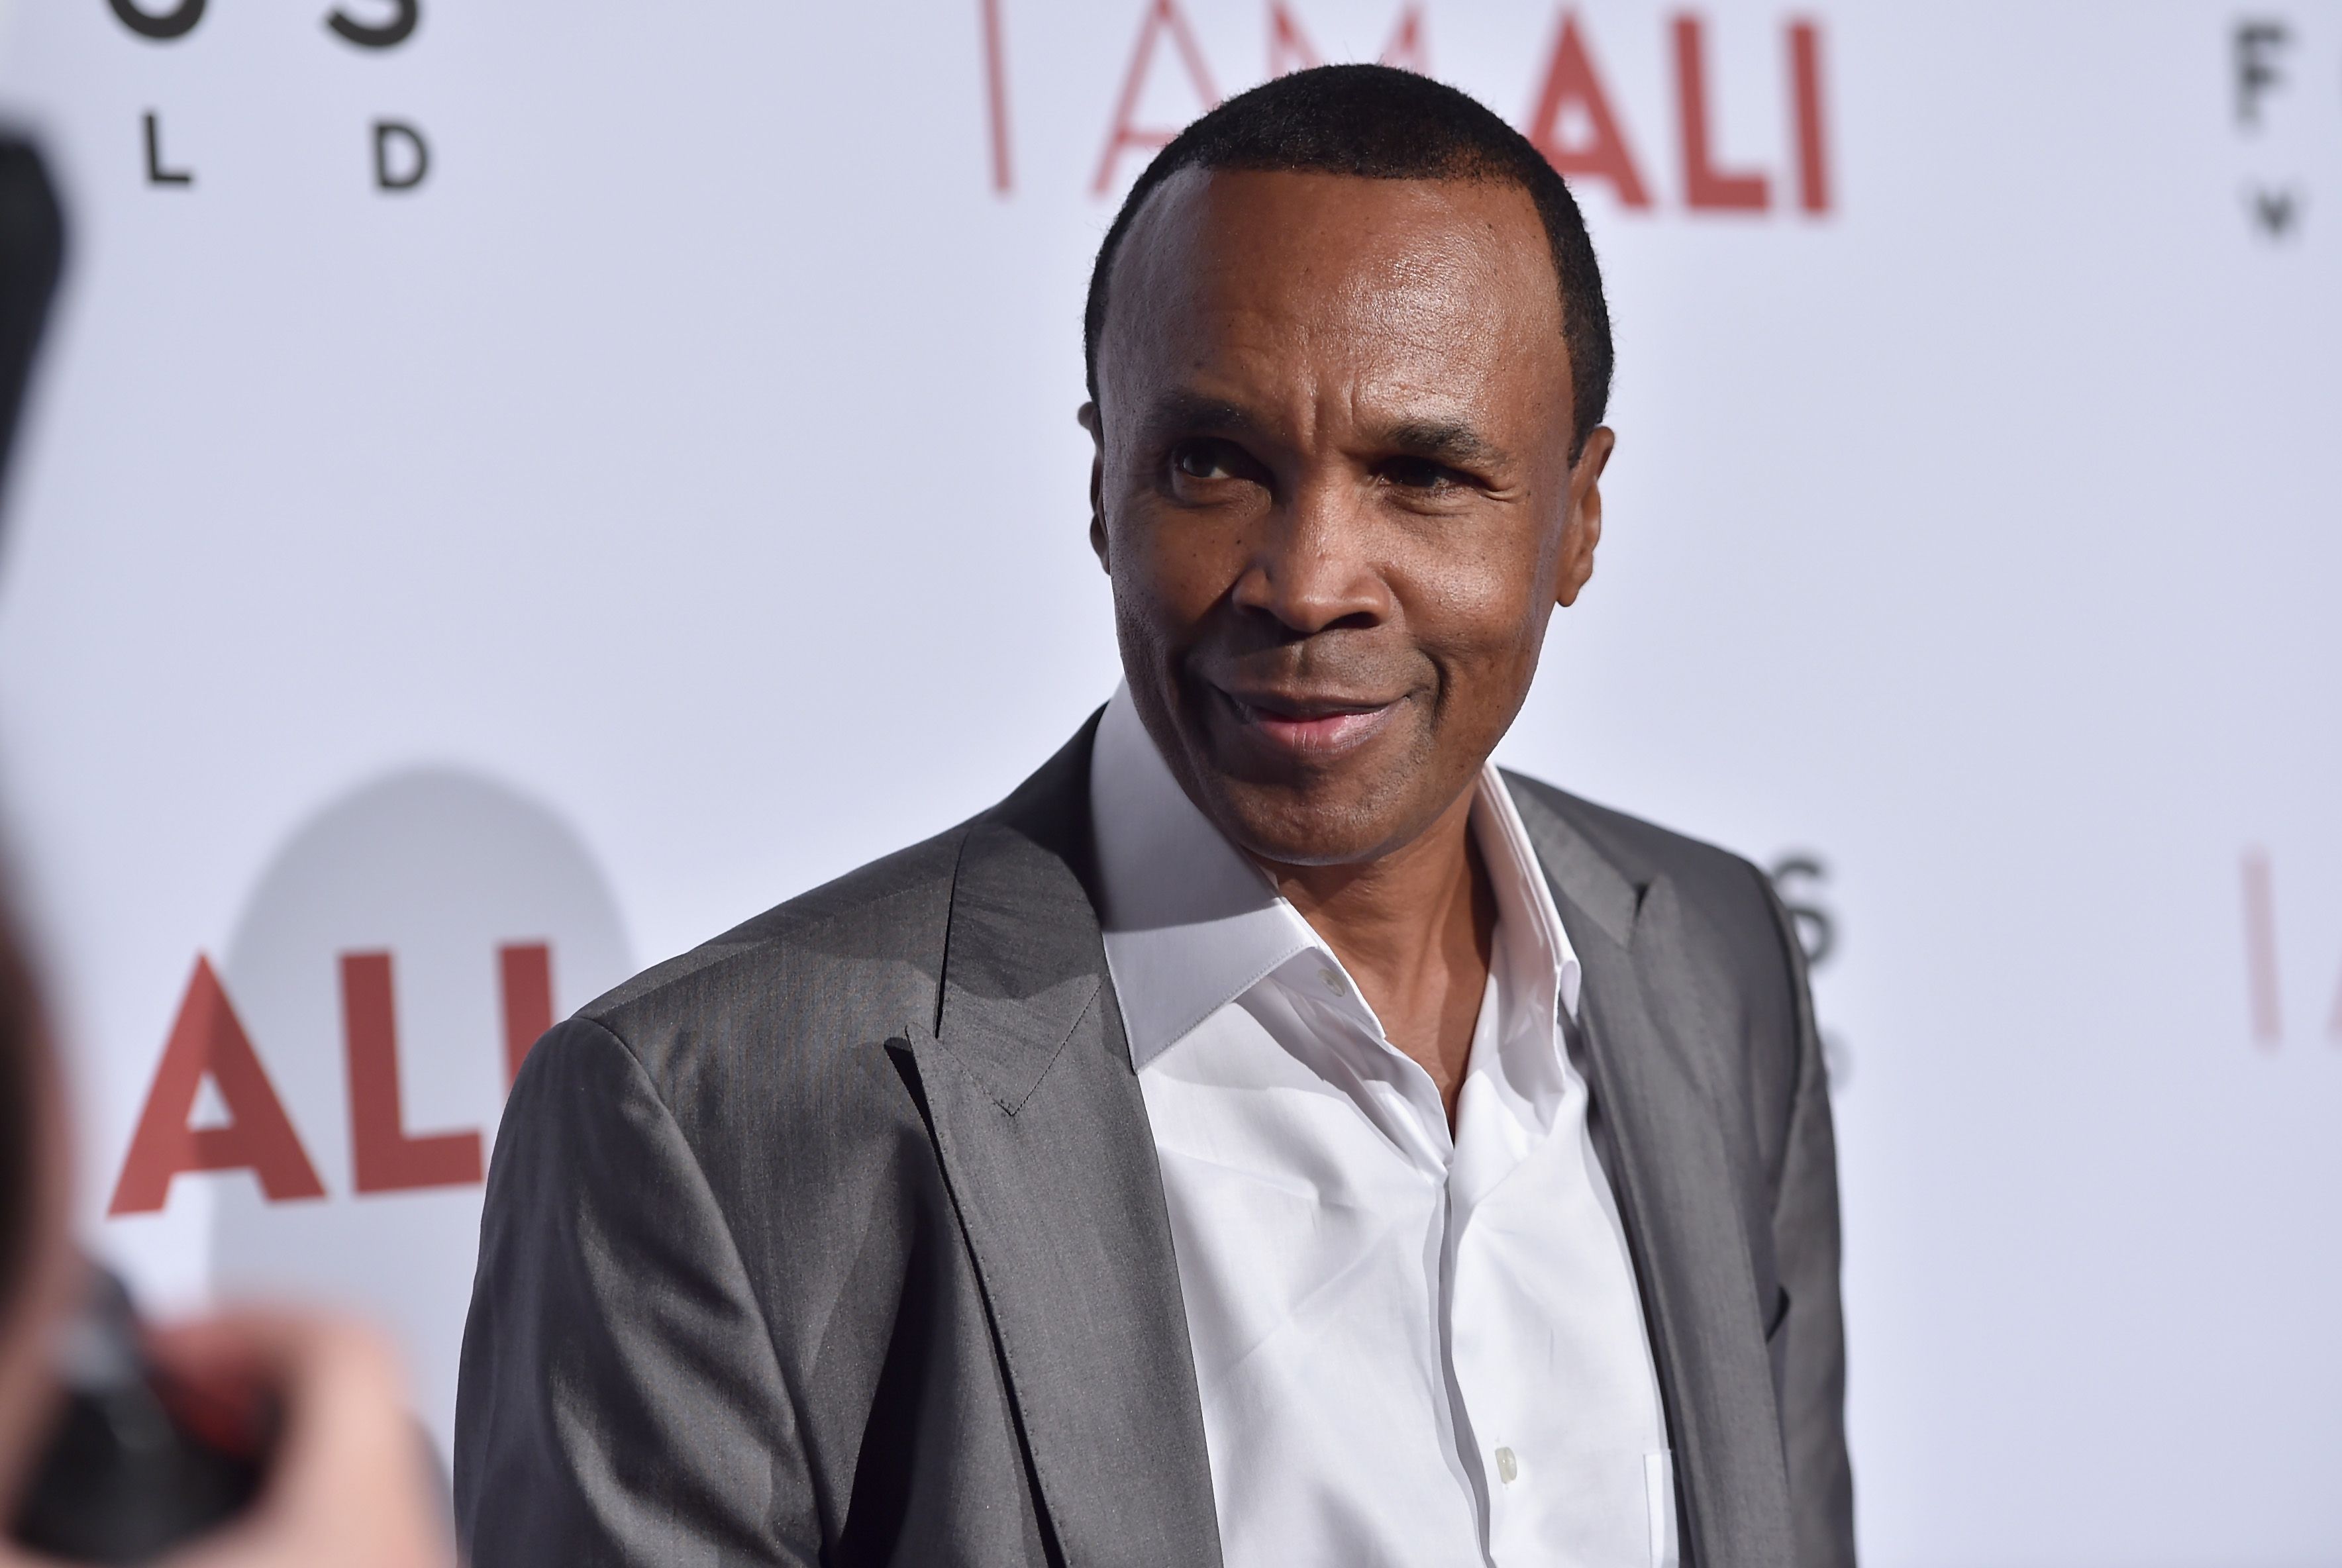 Sugar Ray Leonard attends the Los Angeles premiere of Focus World's "I Am Ali" at ArcLight Cinemas on October 8, 2014 in Hollywood, California. | Source: Getty Images